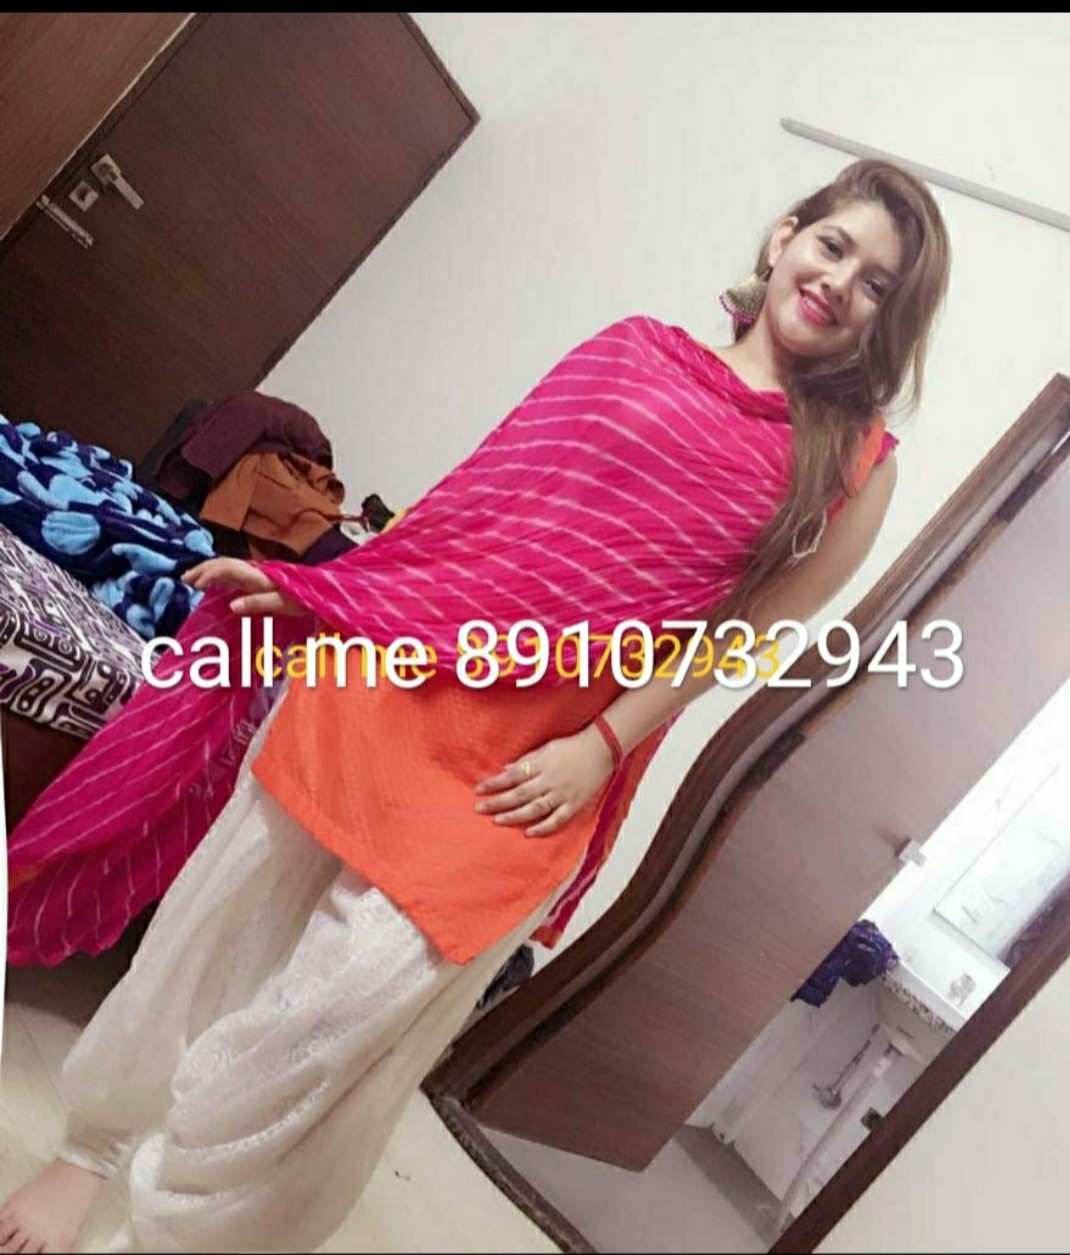 Gurgaon call girls in escorts service available anytime gg 